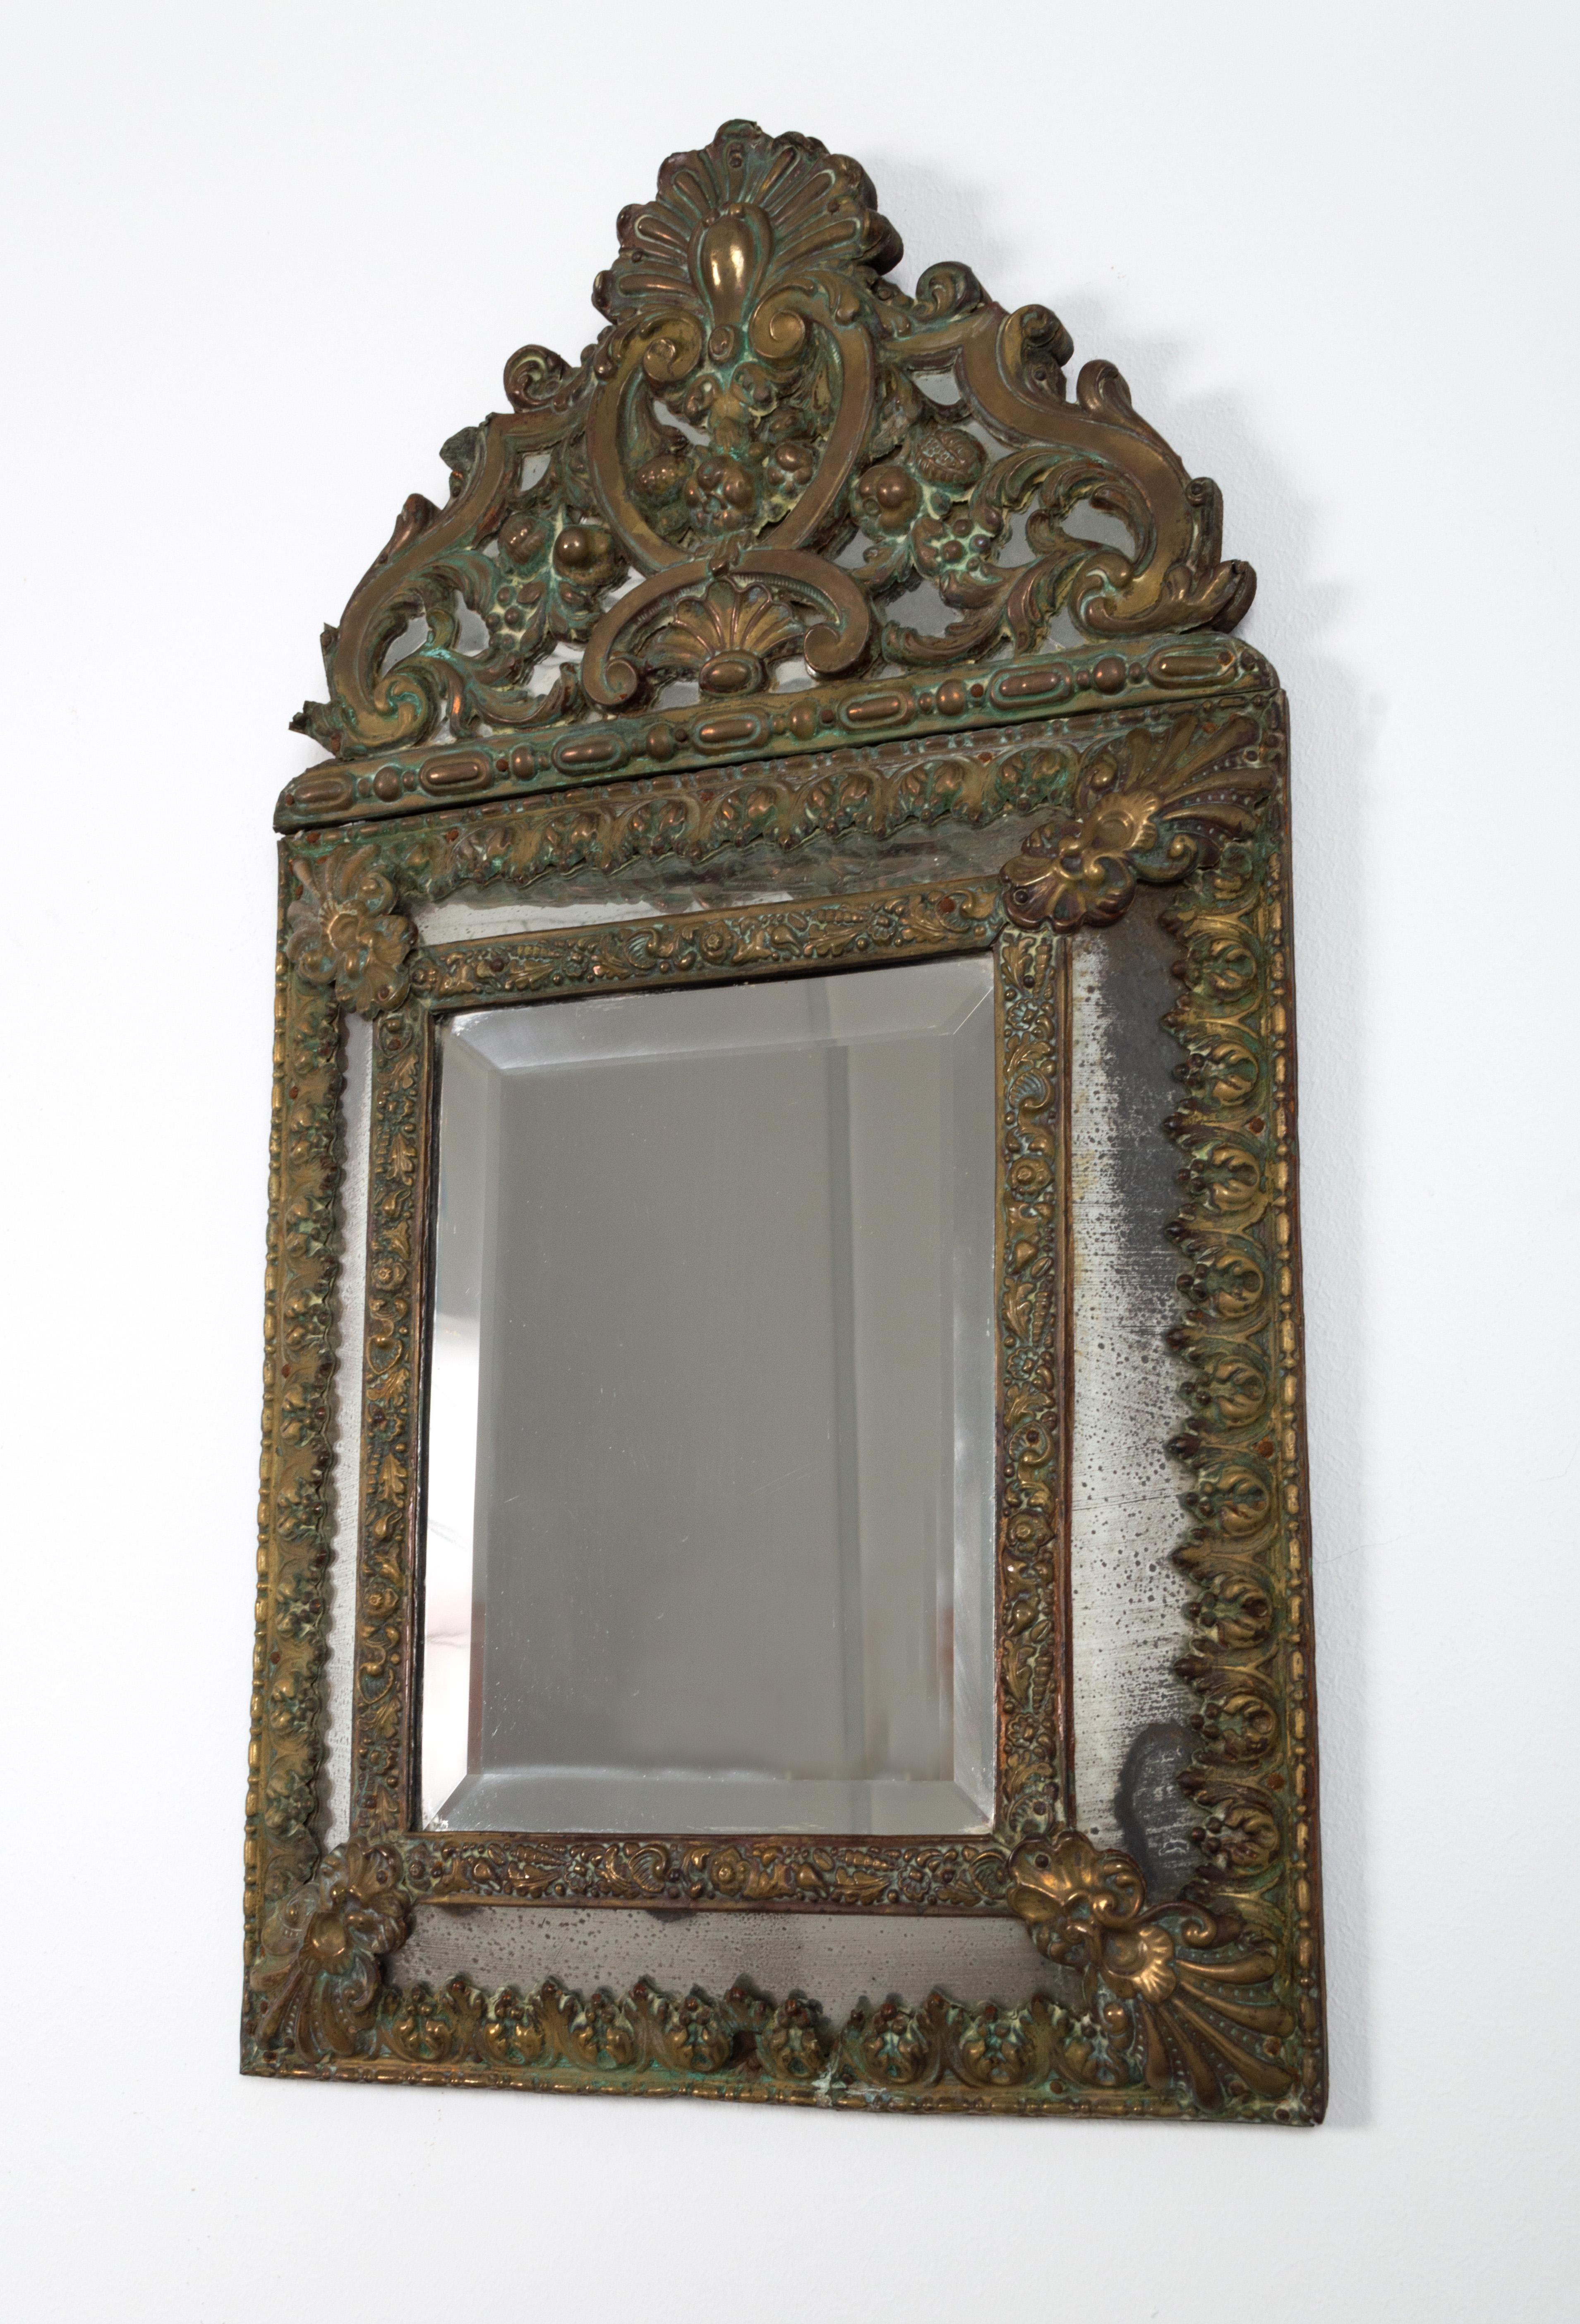 Antique 19th century Dutch brass repousse cushion mirror.
circa 1880.
Attractive patination.
Good condition commensurate with age.